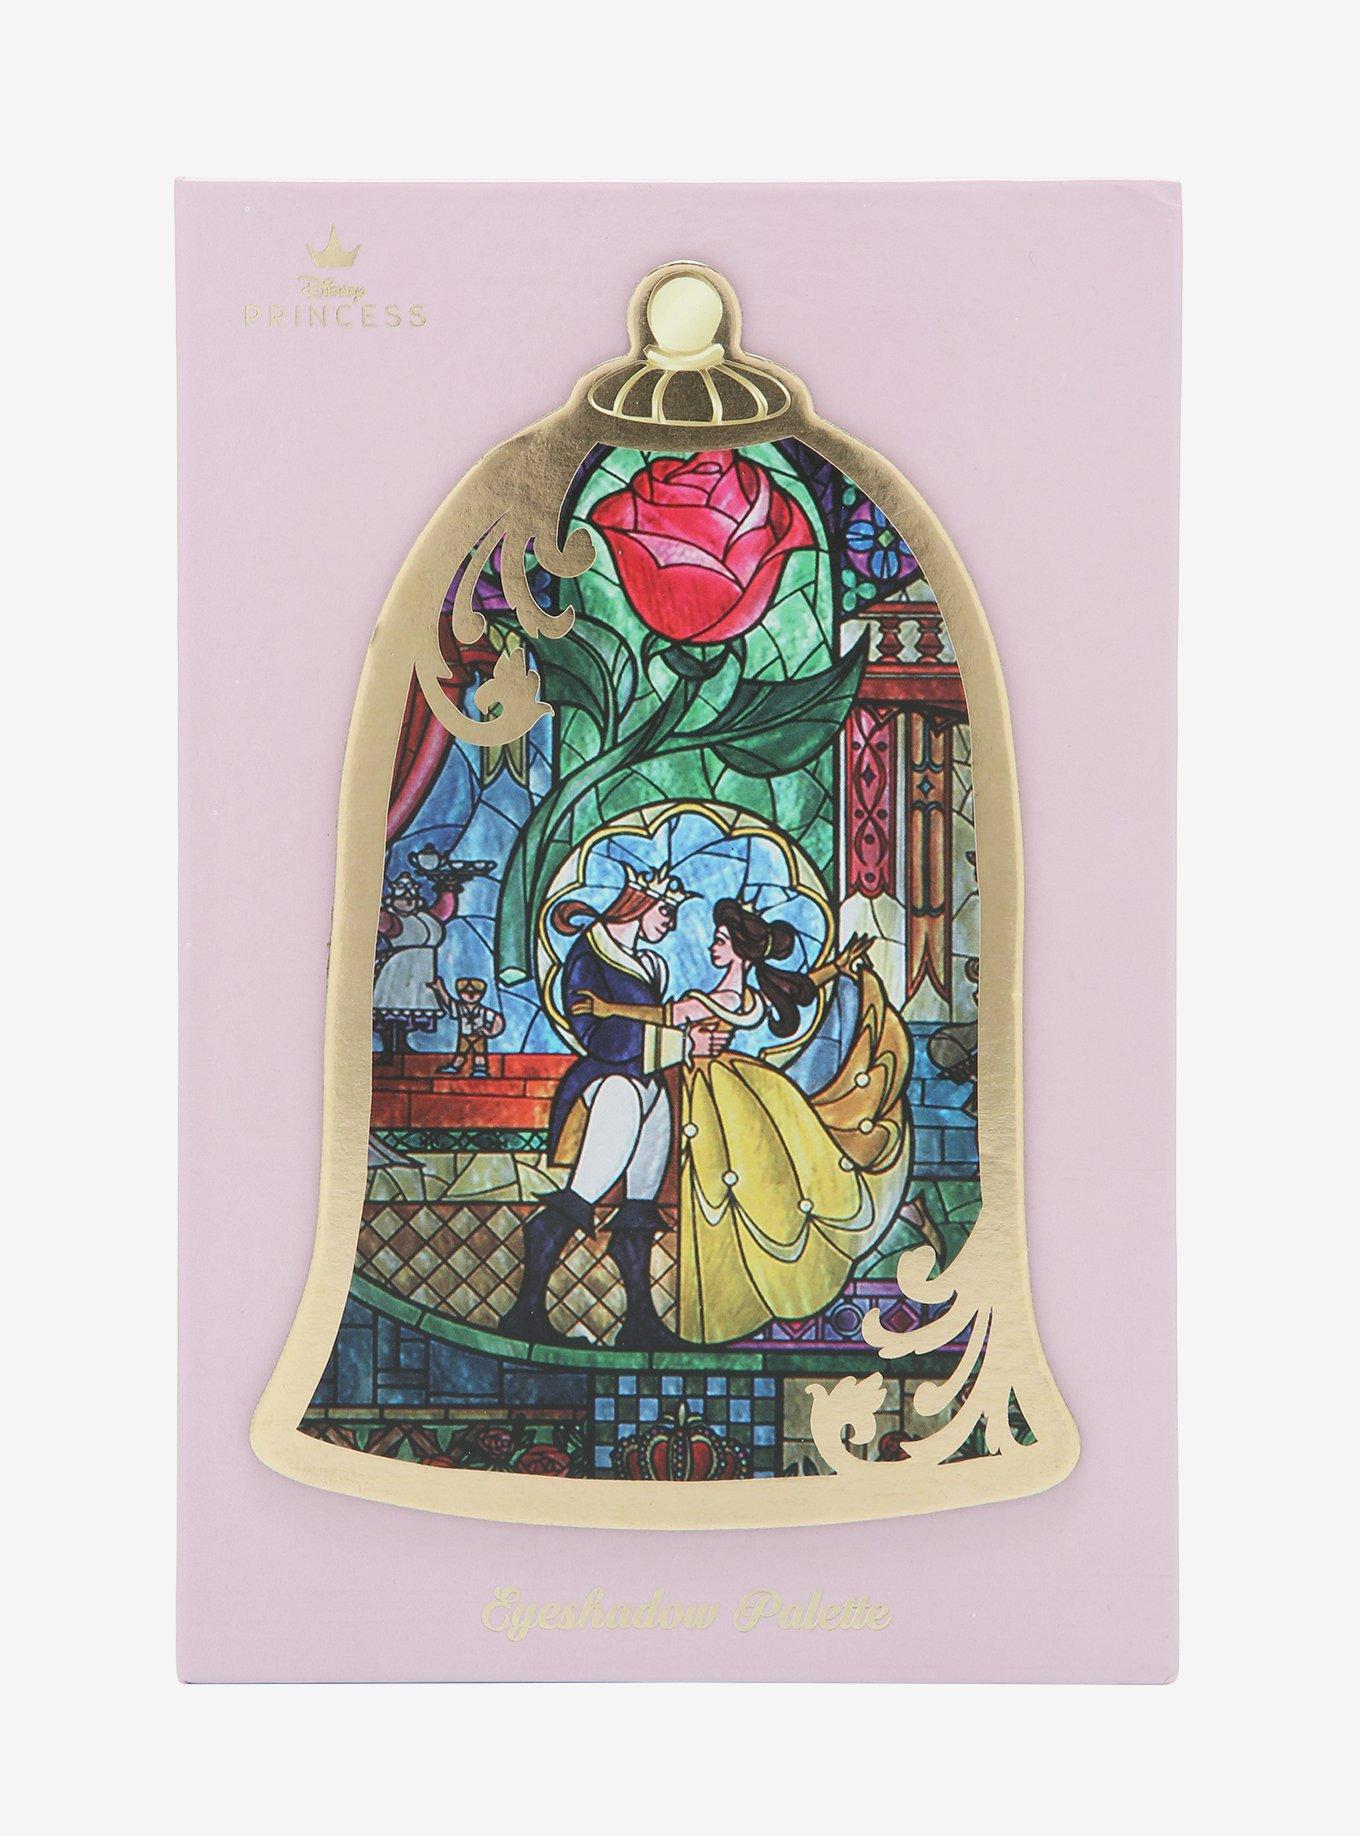 Beauty And The Beast Mosaic Eyeshadow Palette, , hi-res